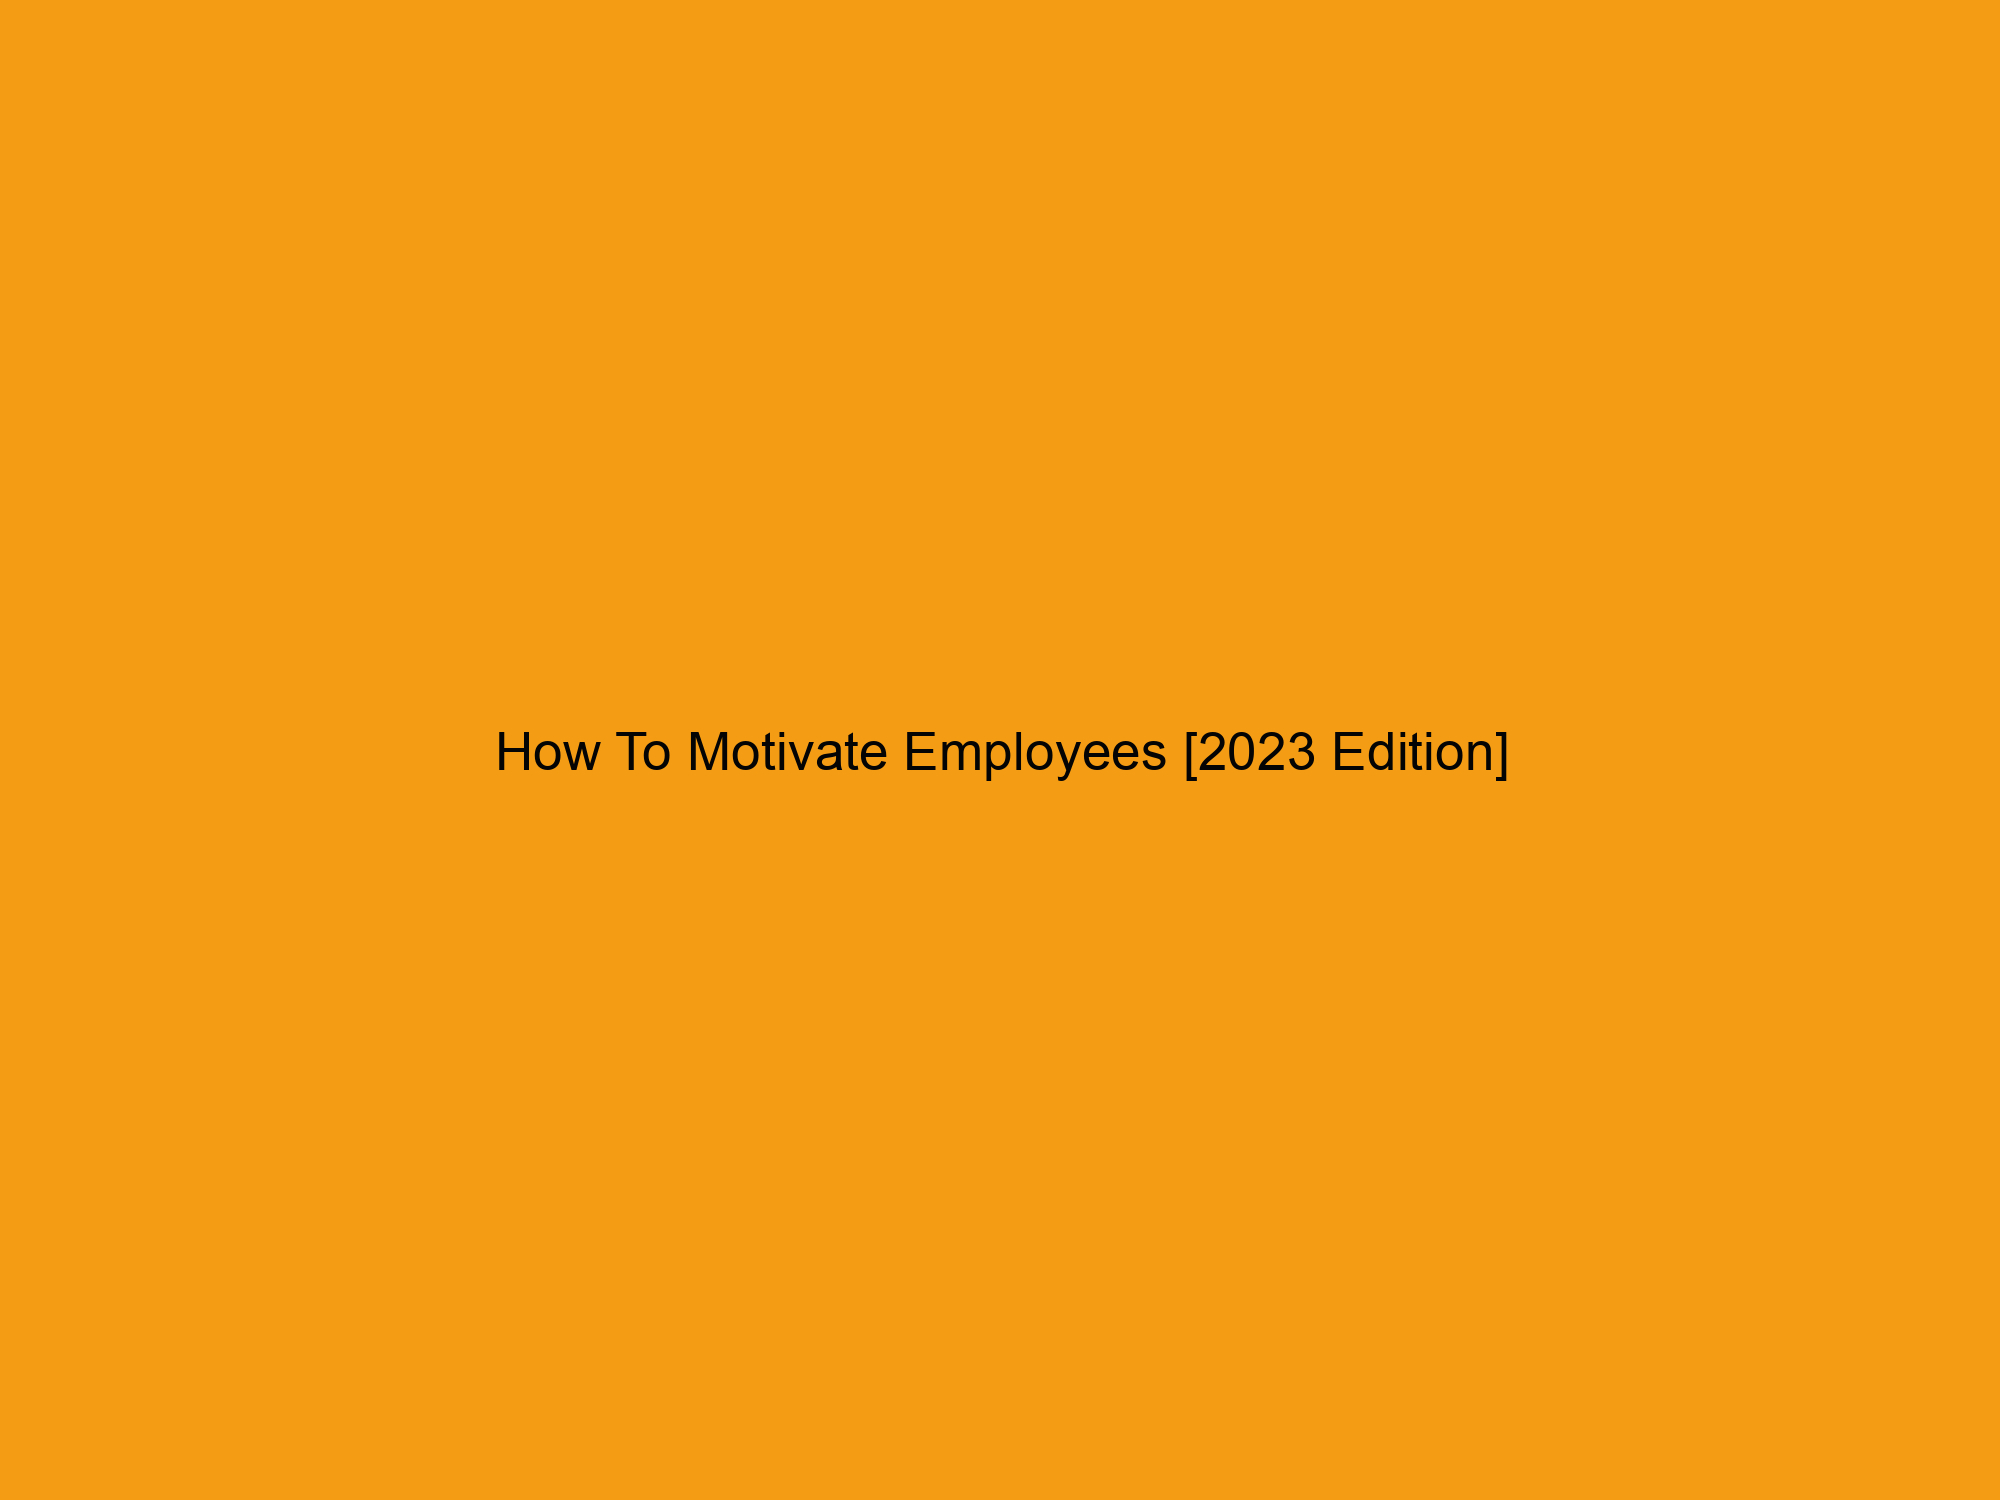 How To Motivate Employees [2023 Edition]